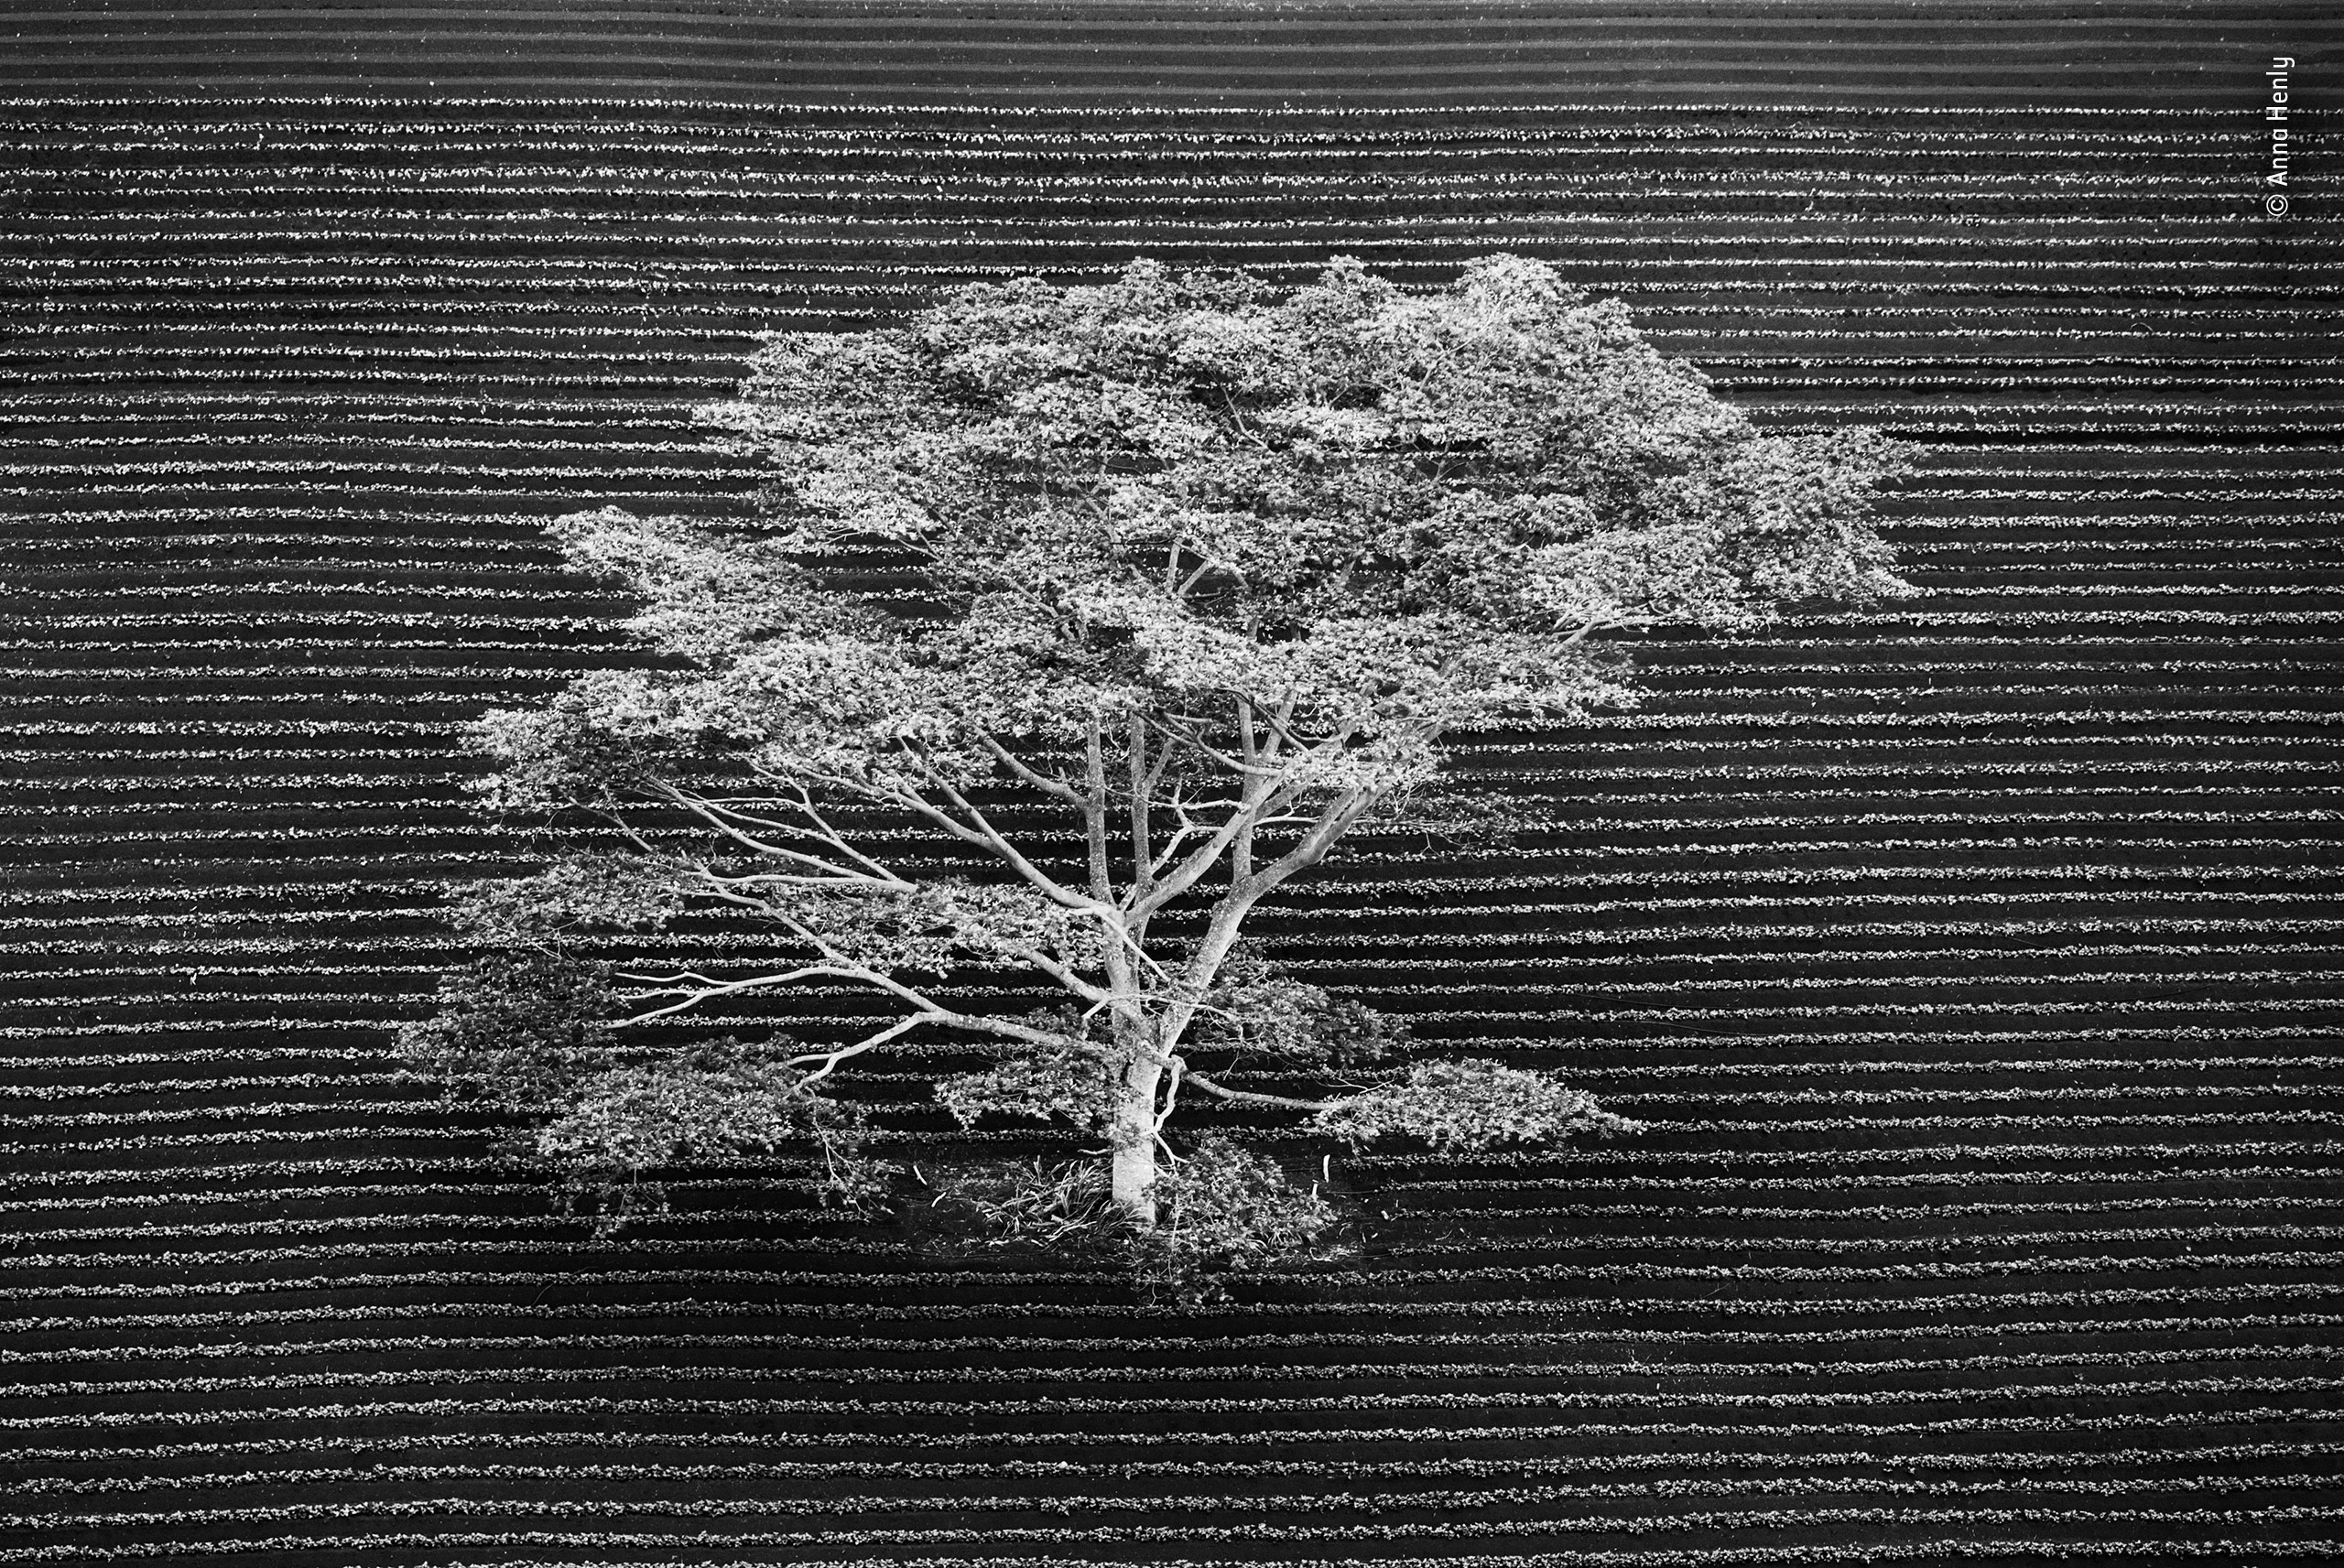 A black and white tree in the middle of ploughed farmland